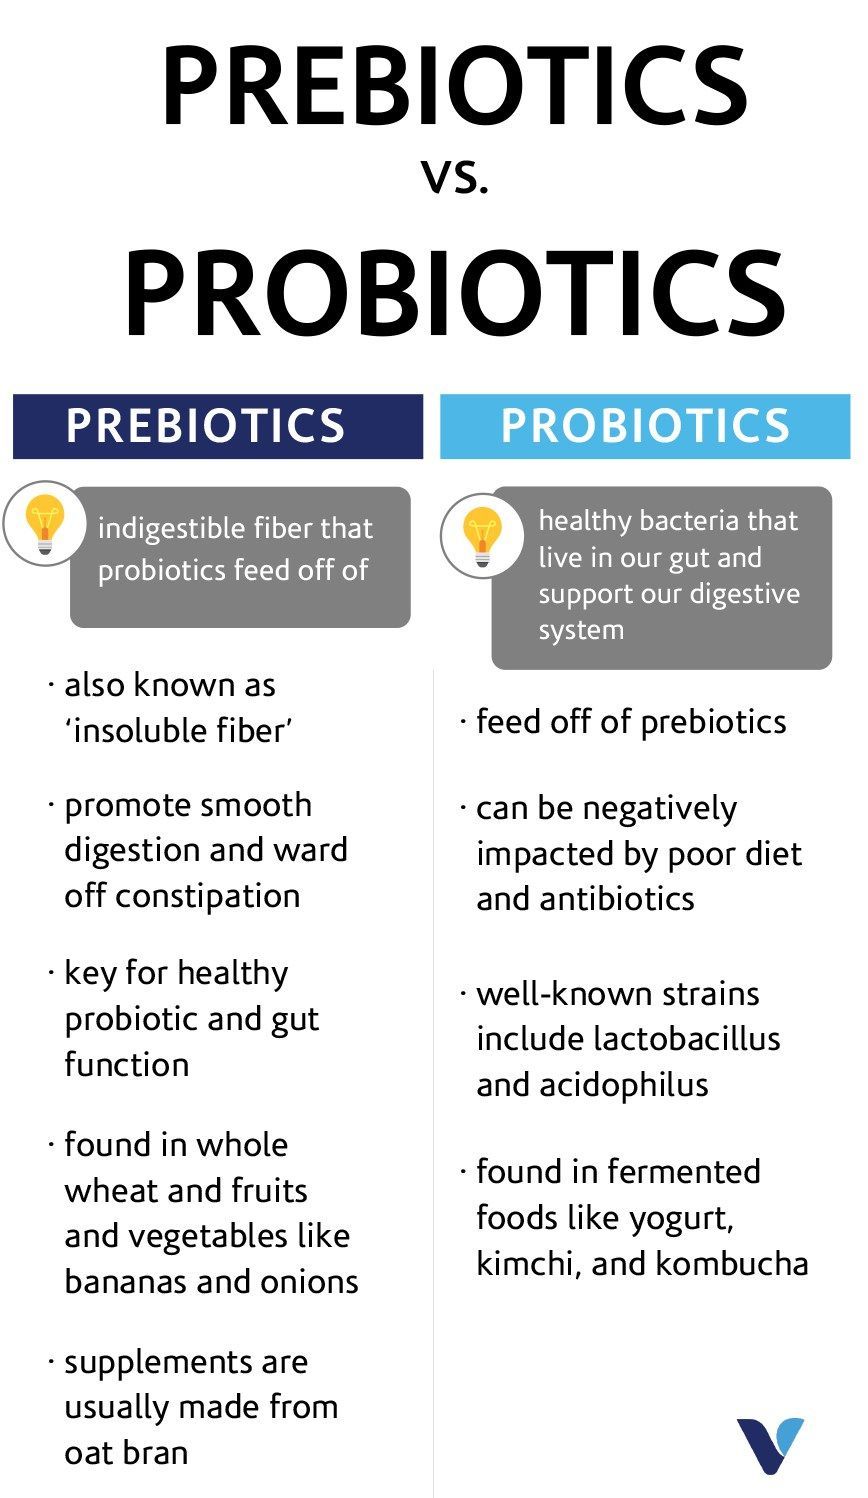 whats the difference between a prebiotic and a probiotic